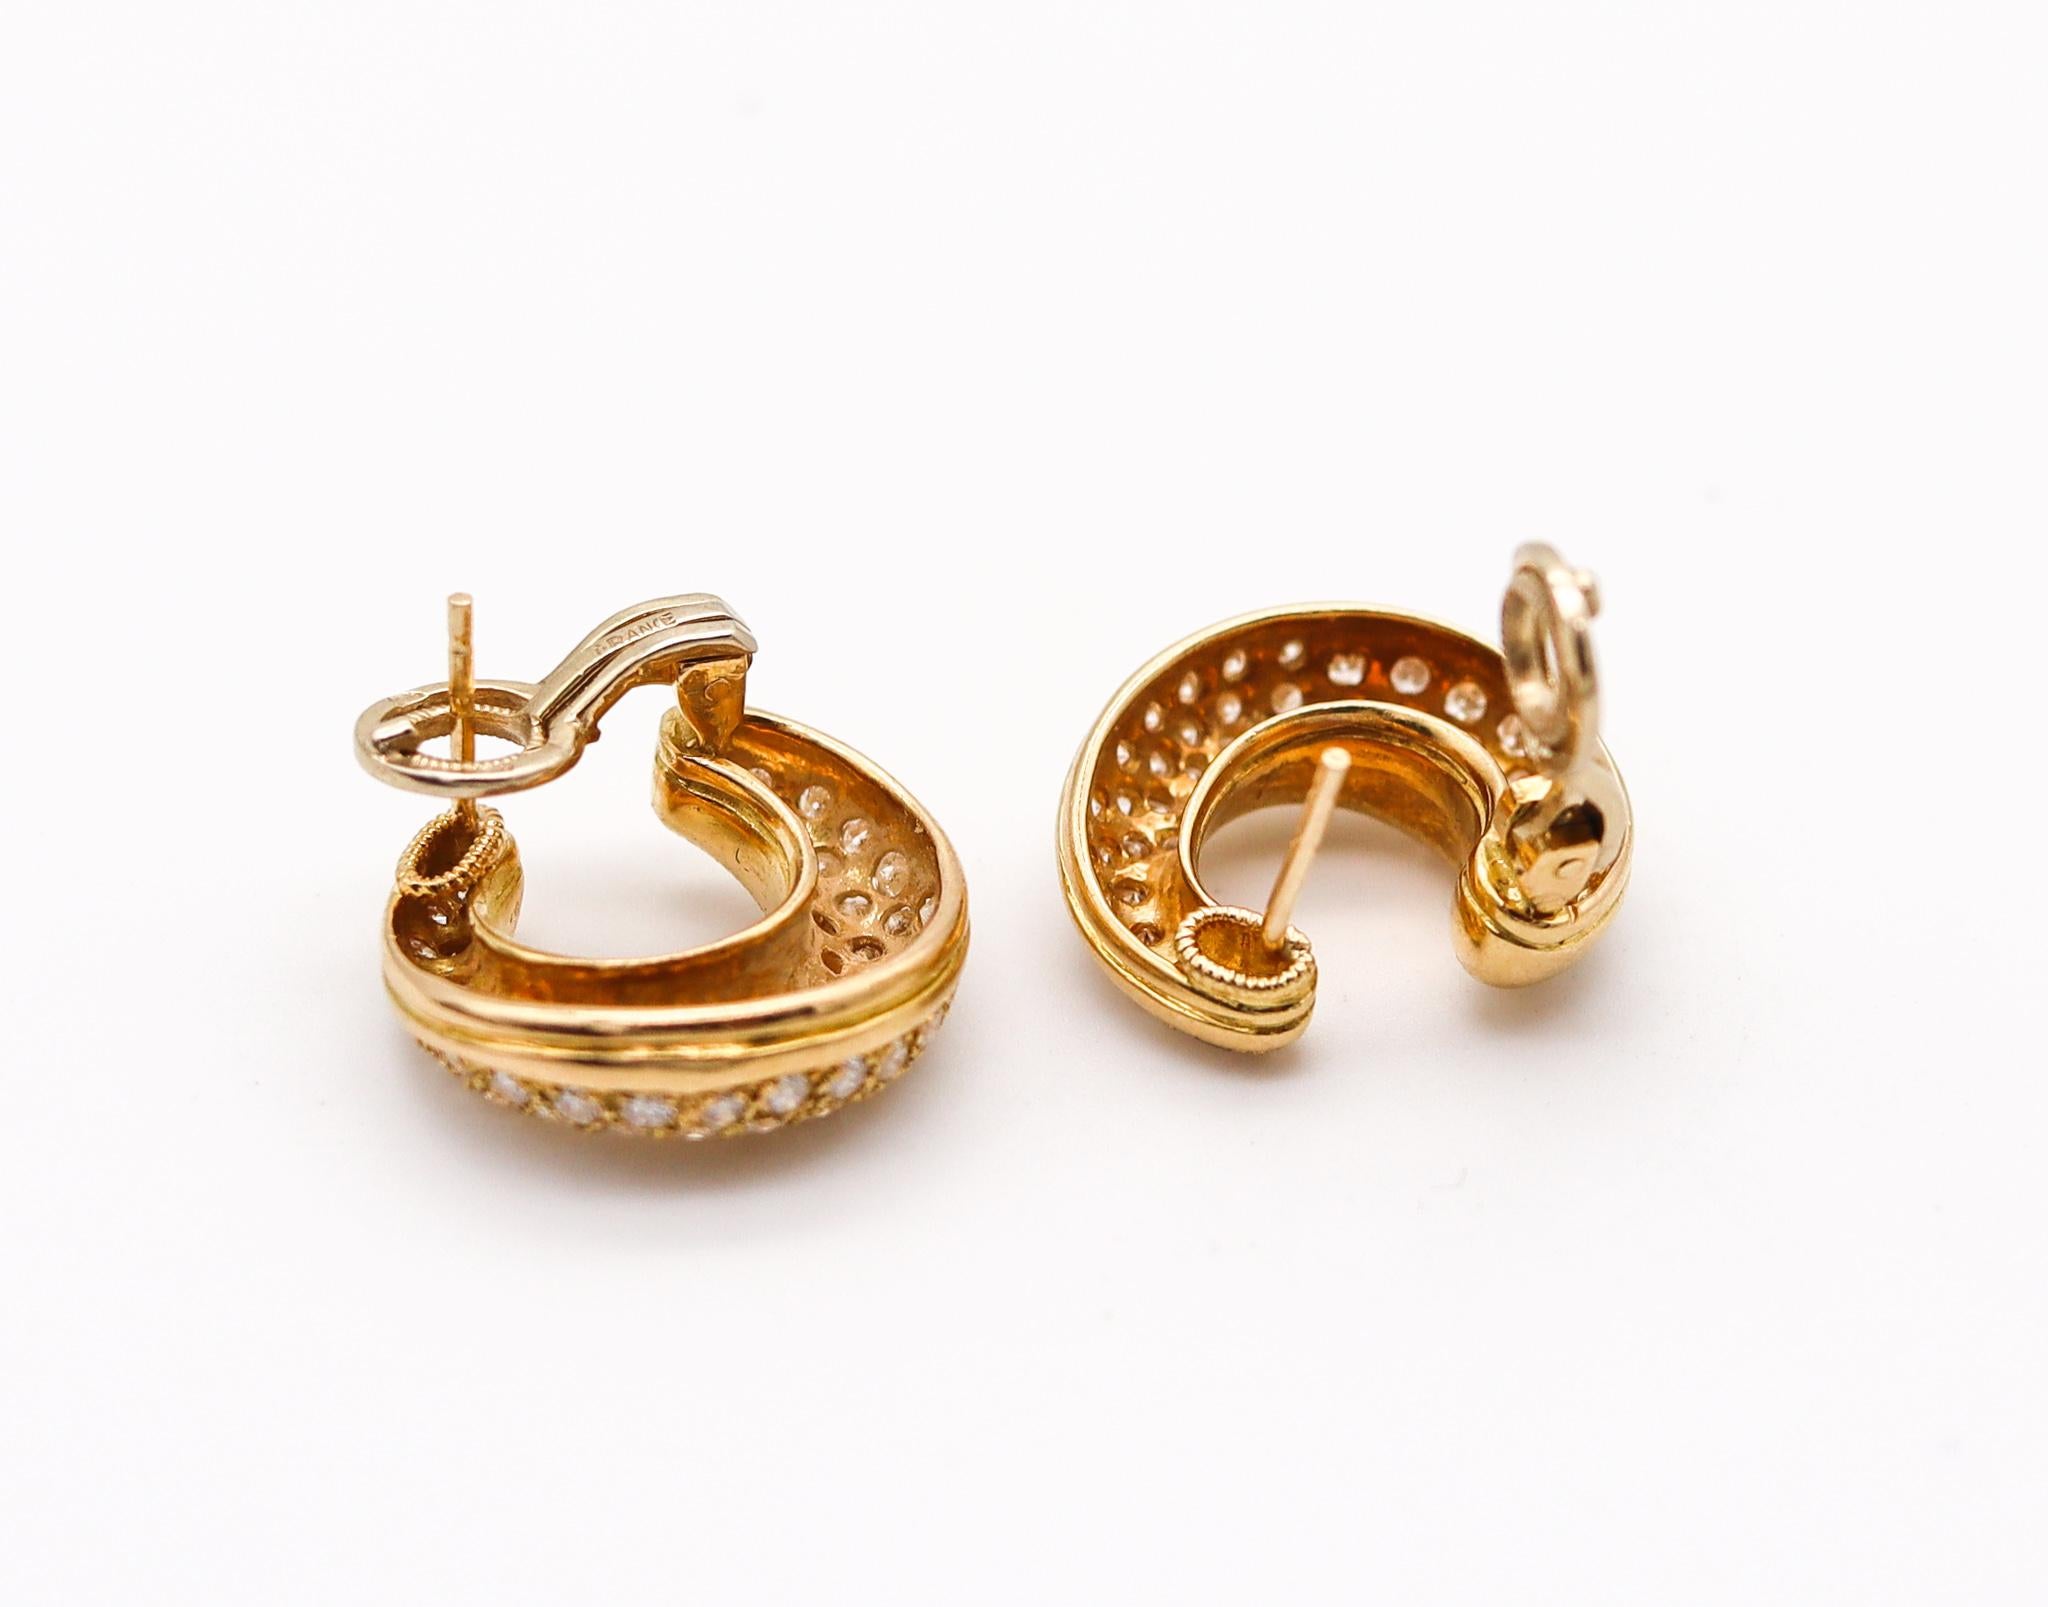 Modernist Fred of Paris Clips On Earrings In 18Kt Yellow Gold With 3.54 Ctw In VVS Diamond